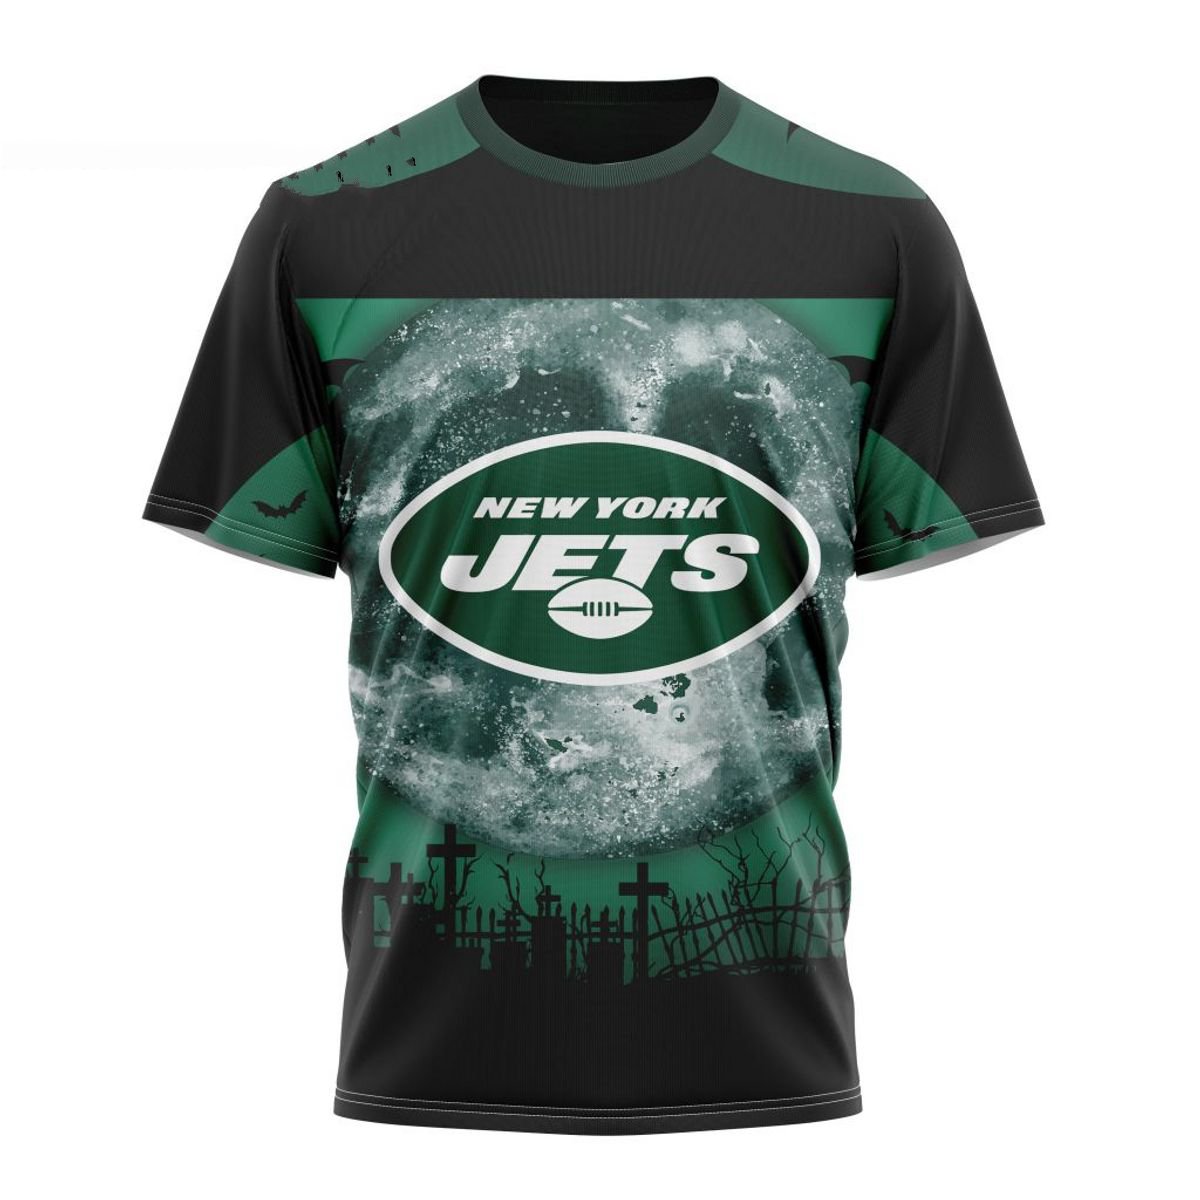 NEW YORK JETS 3D HOODIE CONCEPTS KITS